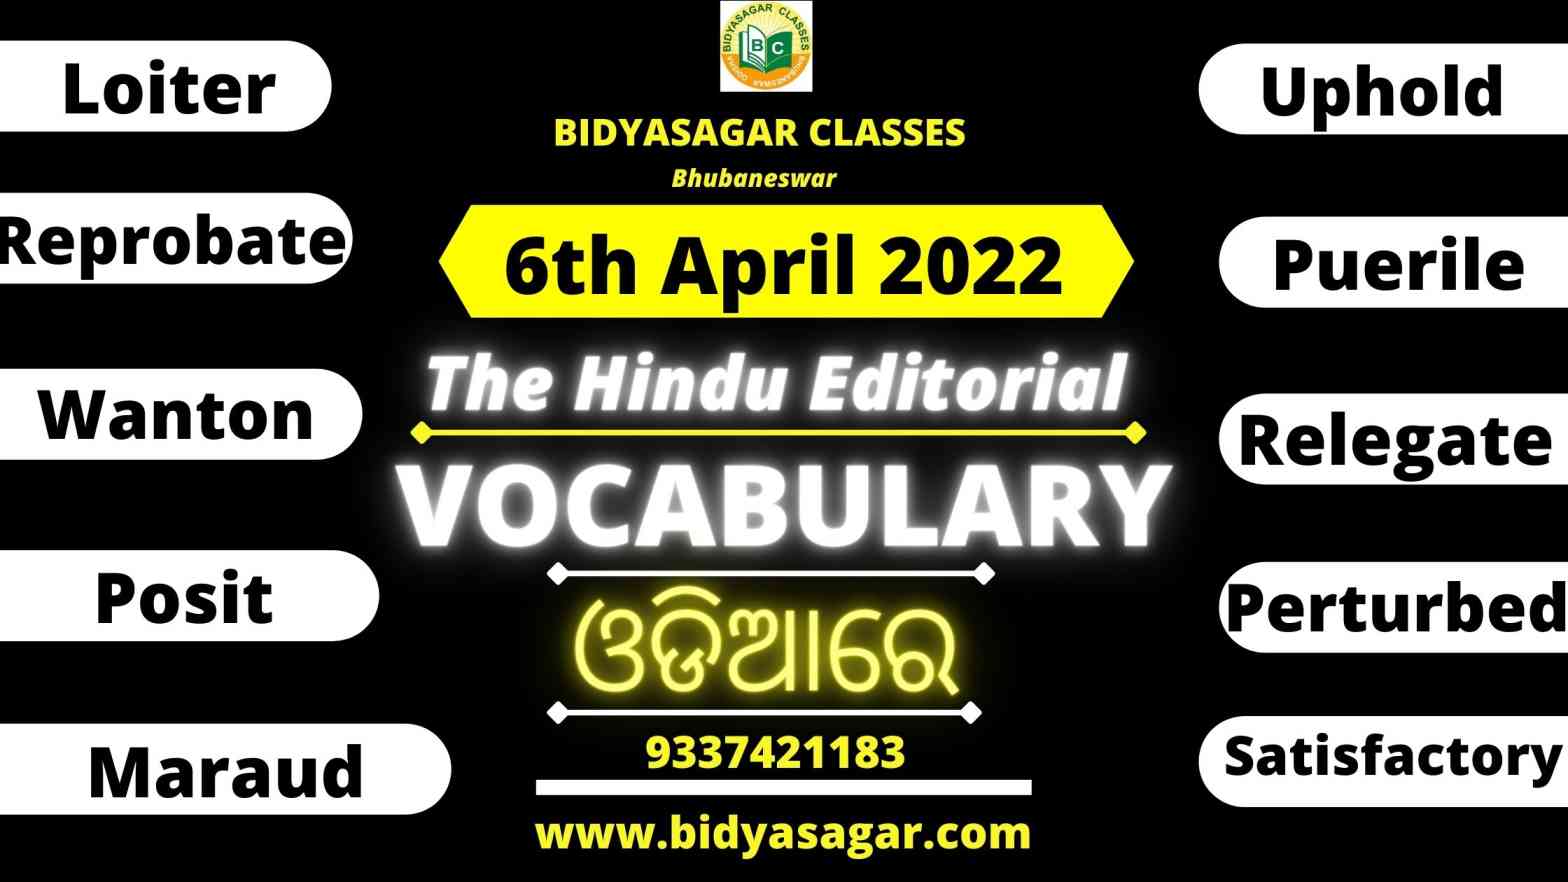 The Hindu Editorial Vocabulary of 6th April 2022